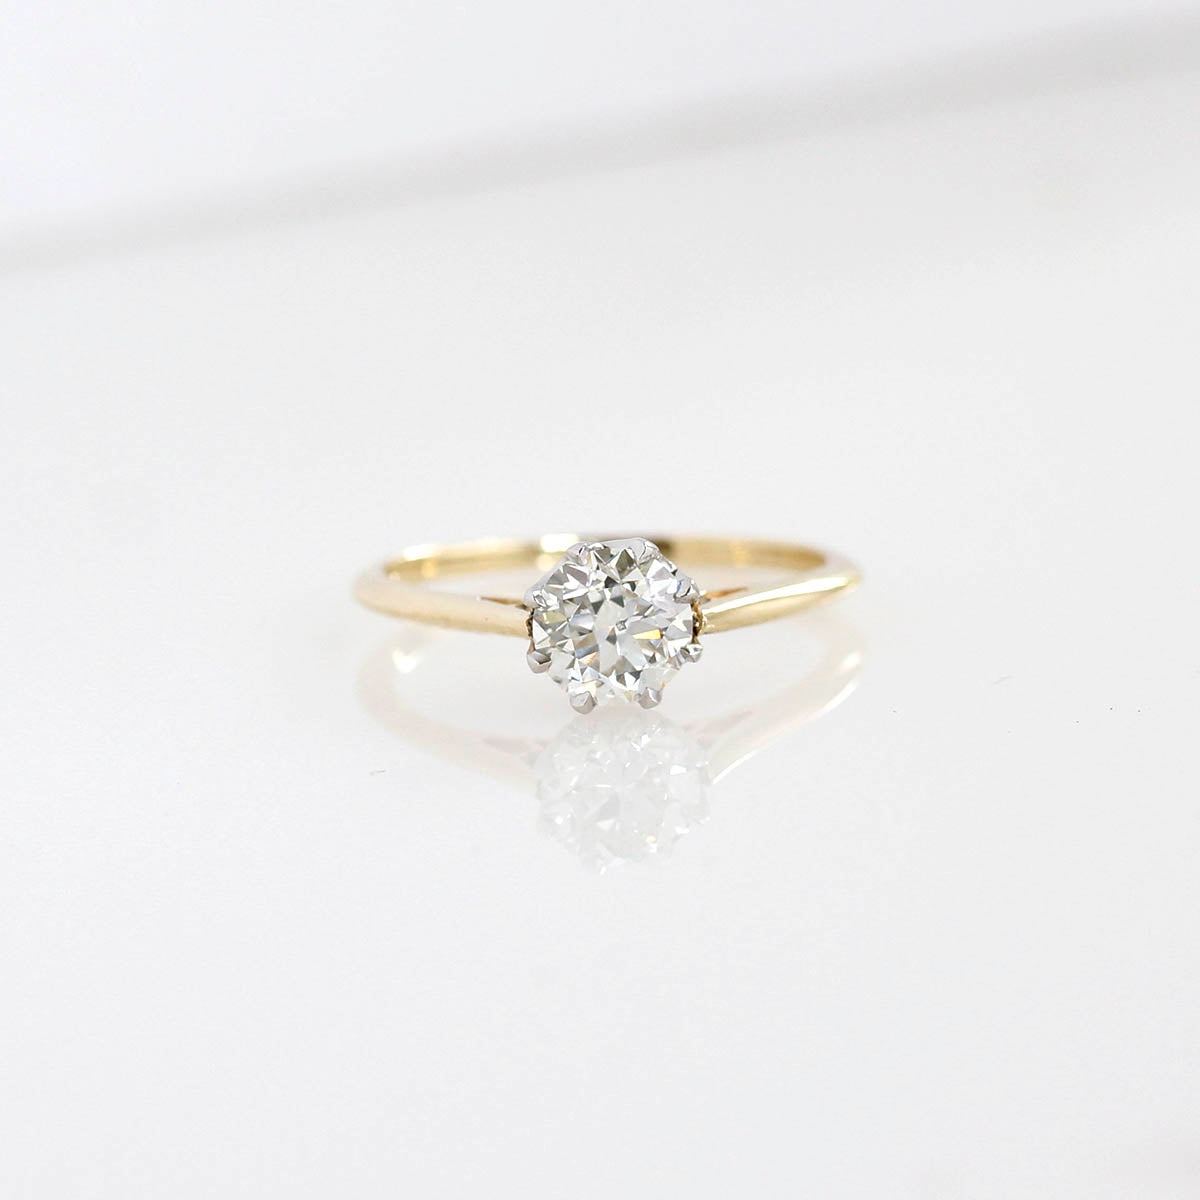 Replica Edwardian Engagement Ring #3411-2 - Leigh Jay & Co.